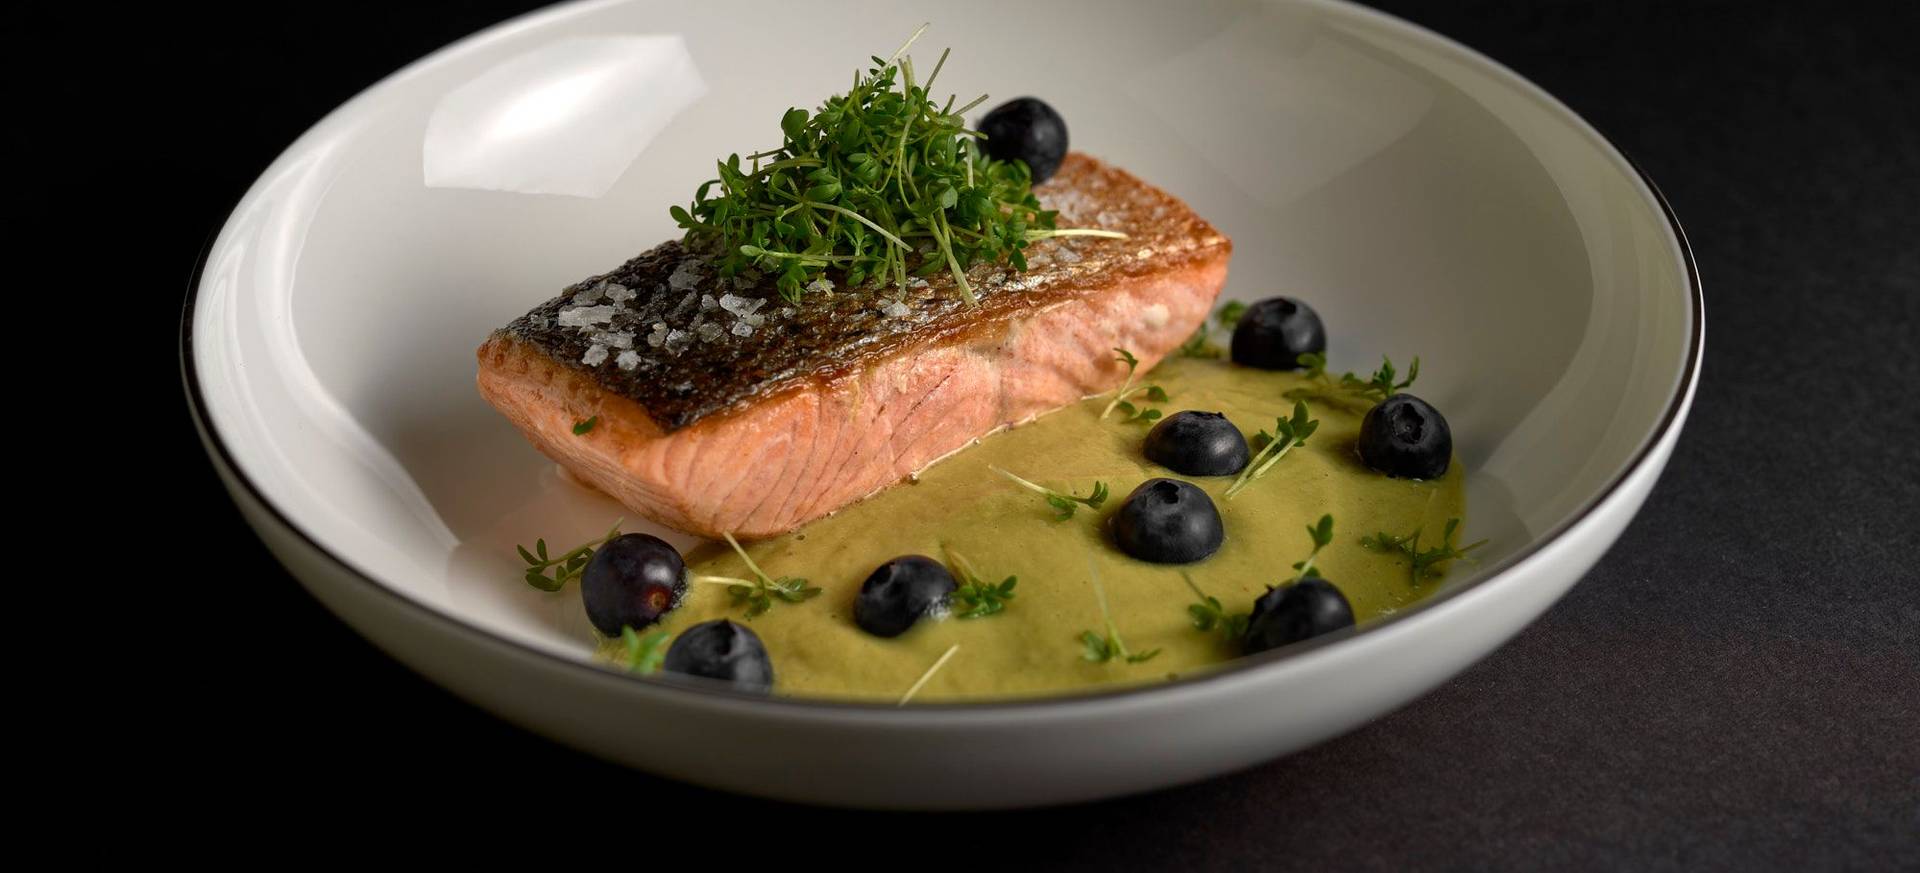 Pan Fried Salmon with Asparagus-Matcha Sauce & Blueberries 